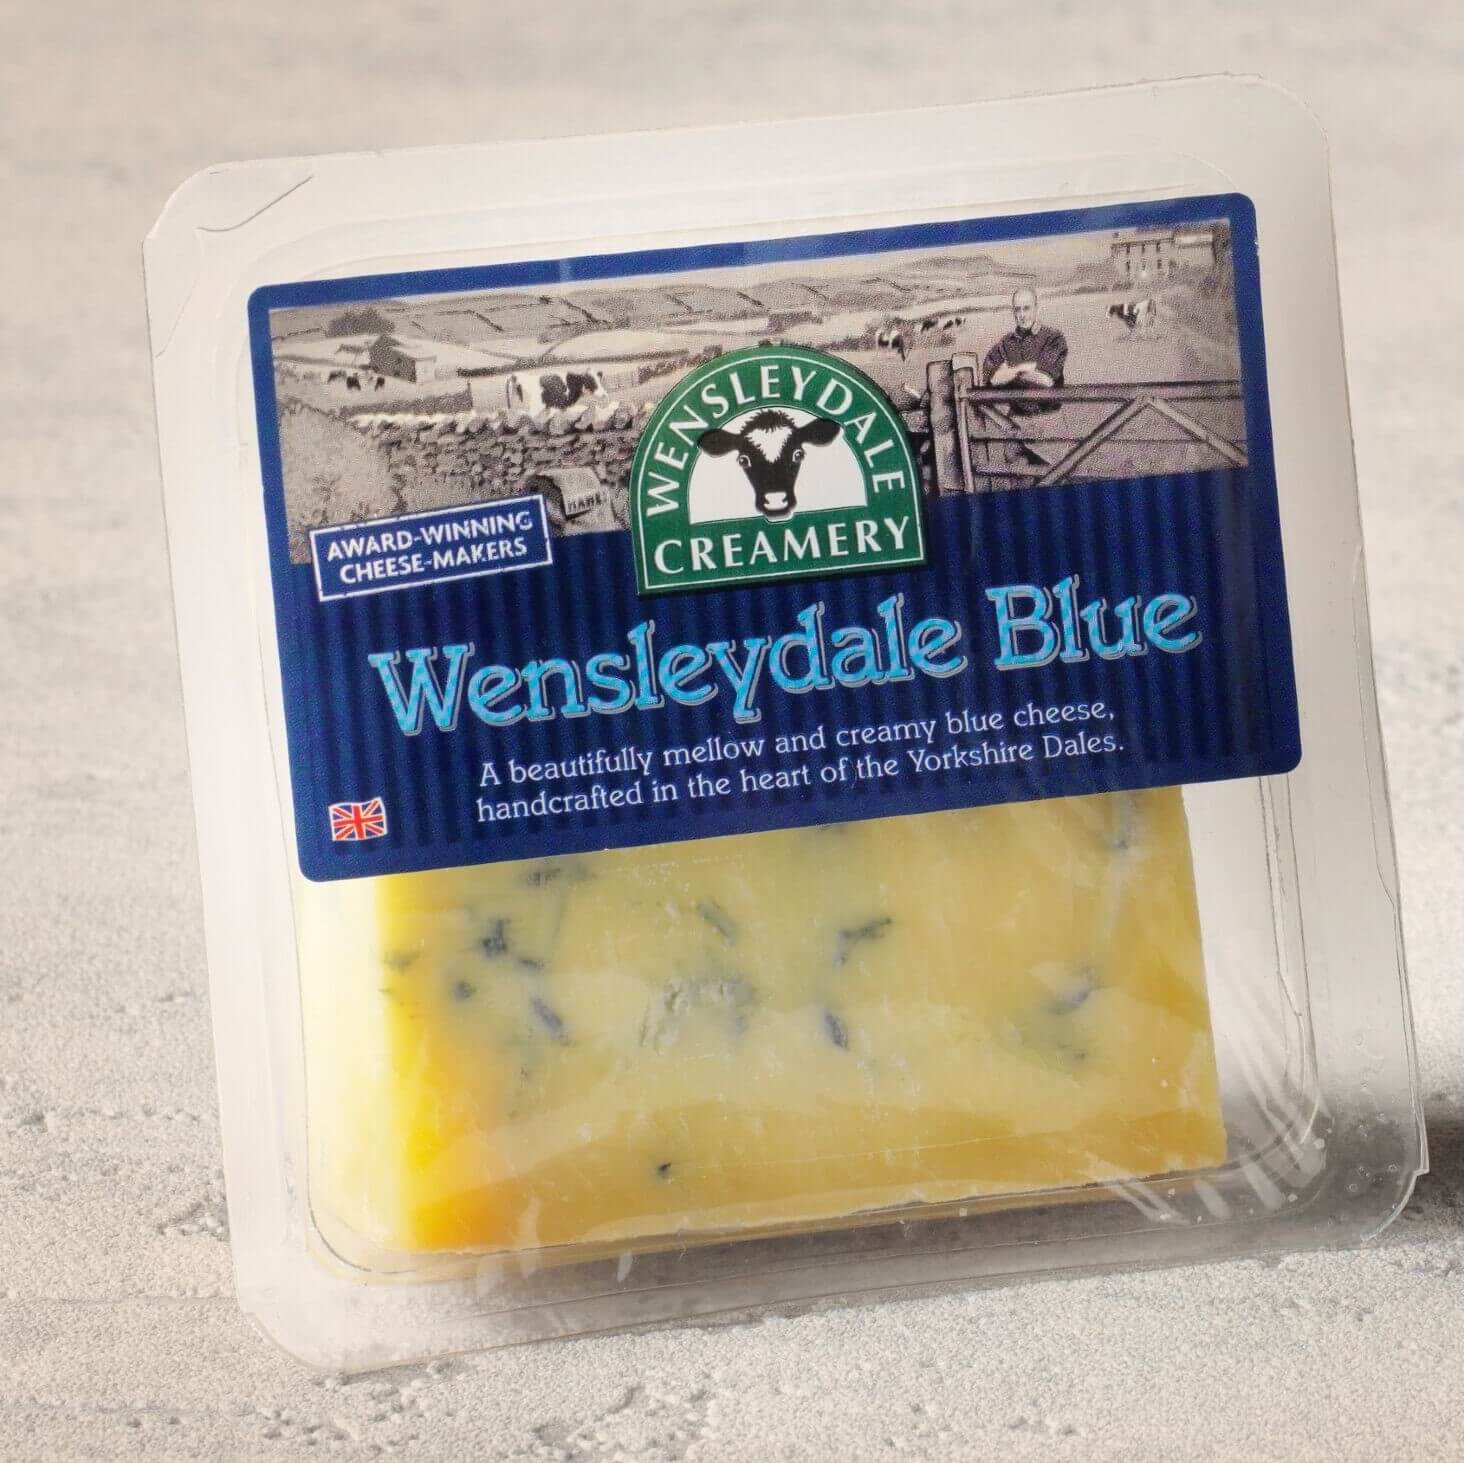 A glimpse of diverse products by Wensleydale Creamery, supporting the UK economy on YouK.